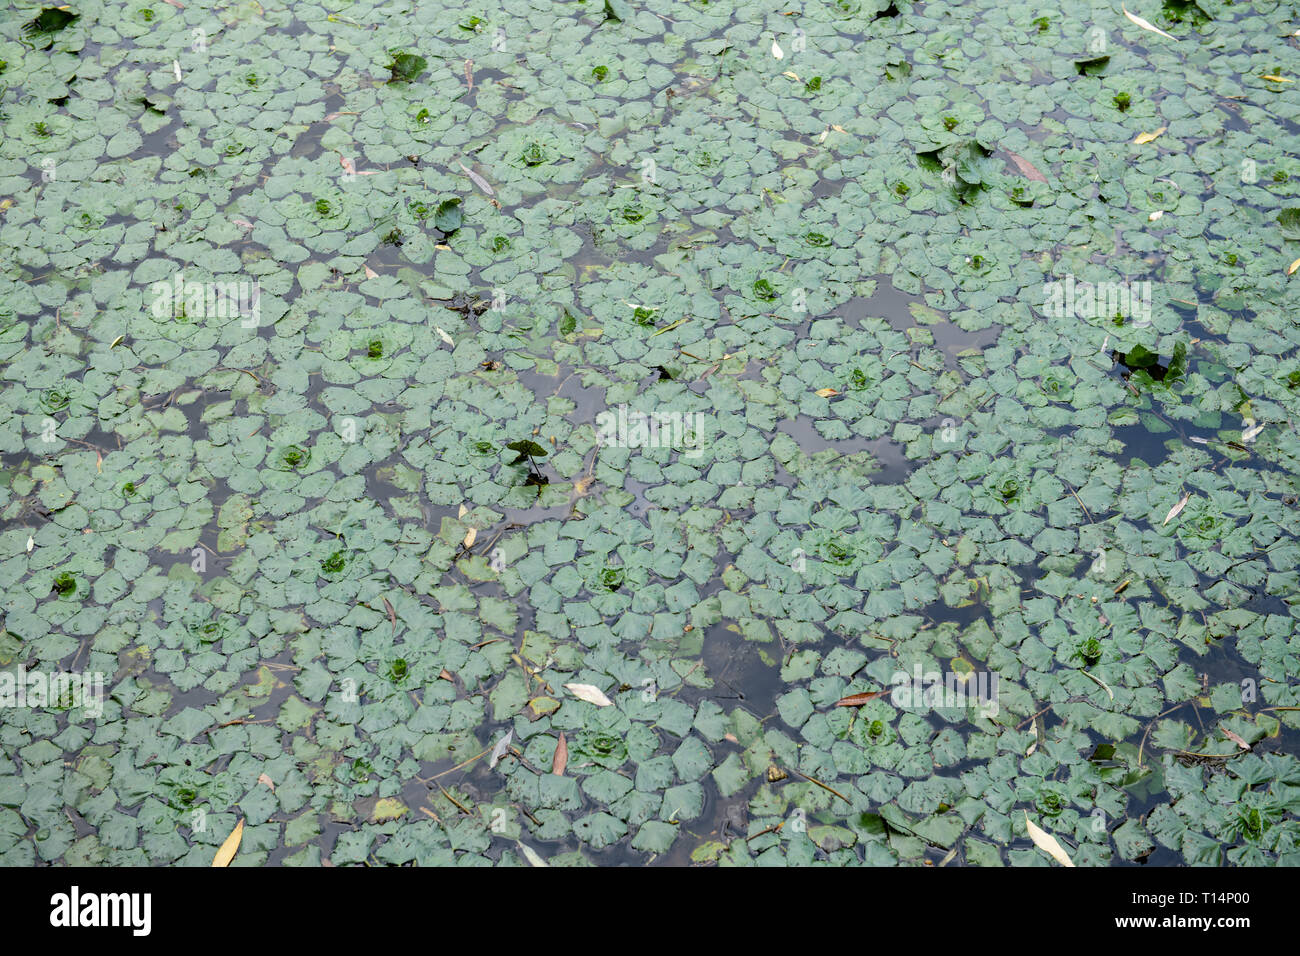 Leaves or pond weed floating on a pond lake water. Stock Photo